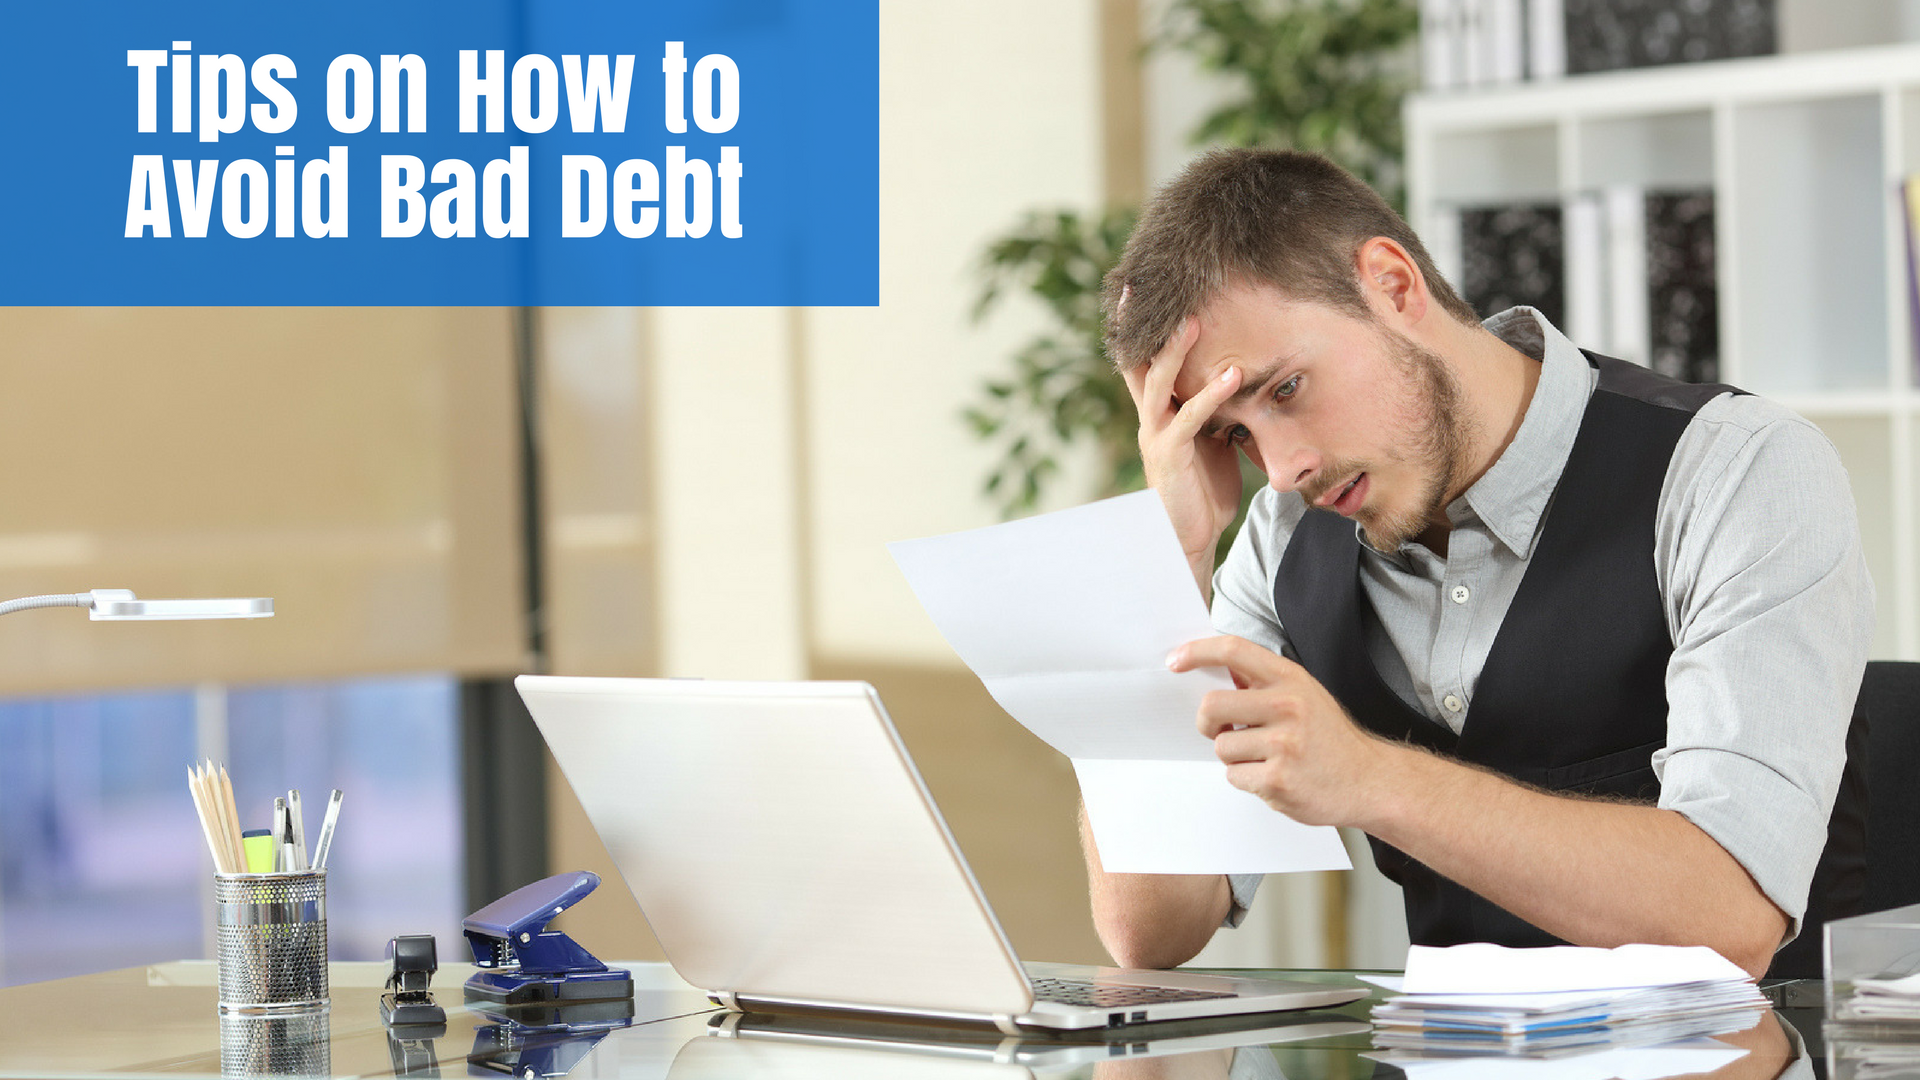 Tips on How to Avoid Bad Debt